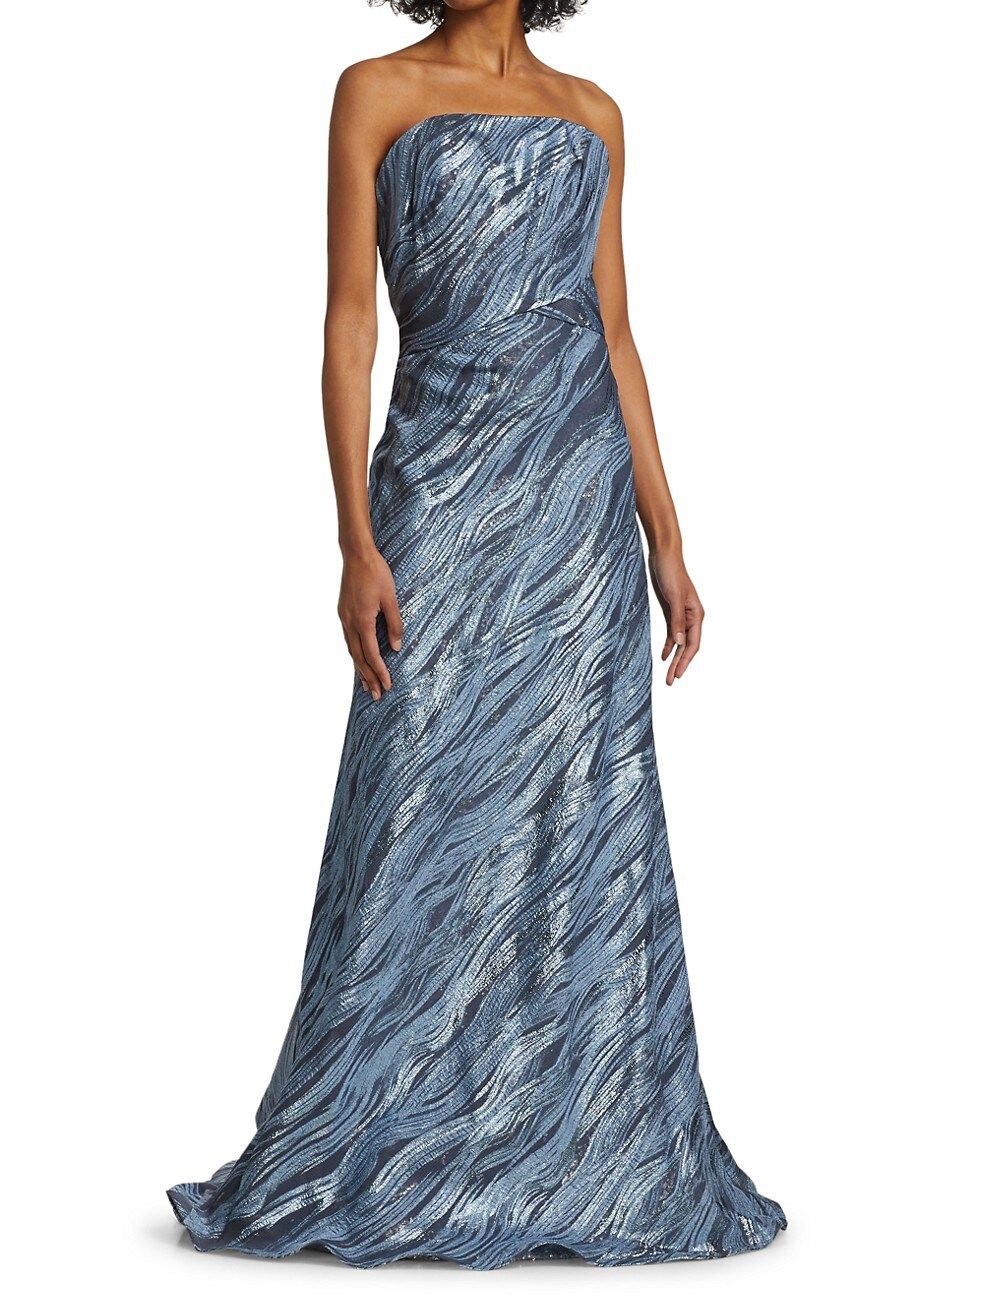 Rene Ruiz Collection Shimmer Fil De Coupe Strapless Gown | Saks Fifth Avenue